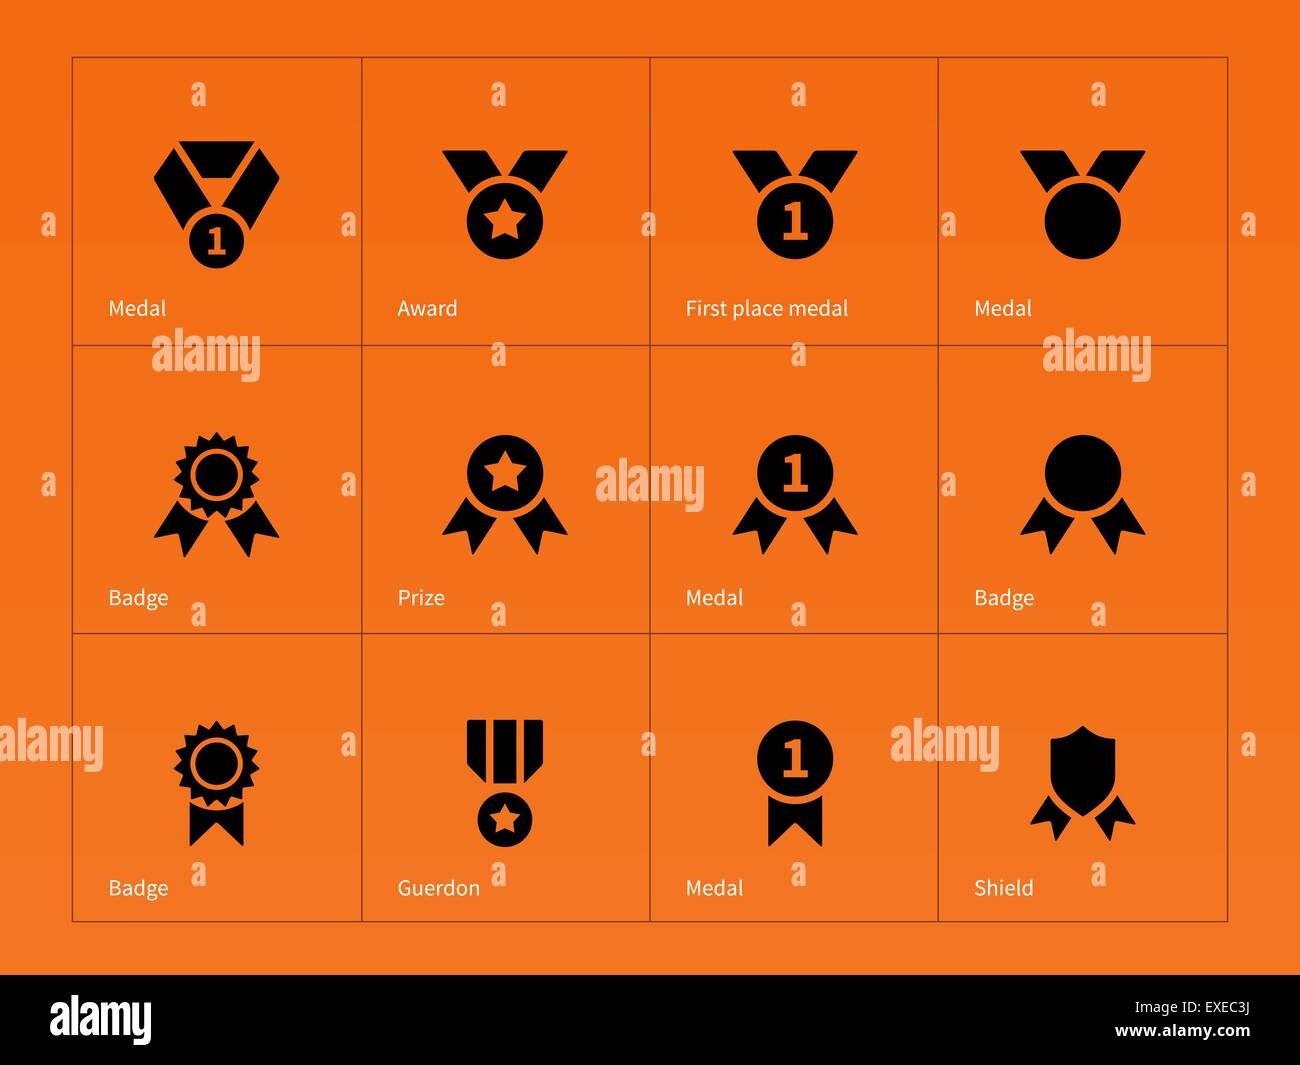 Medal and cup icons on orange background. Stock Vector